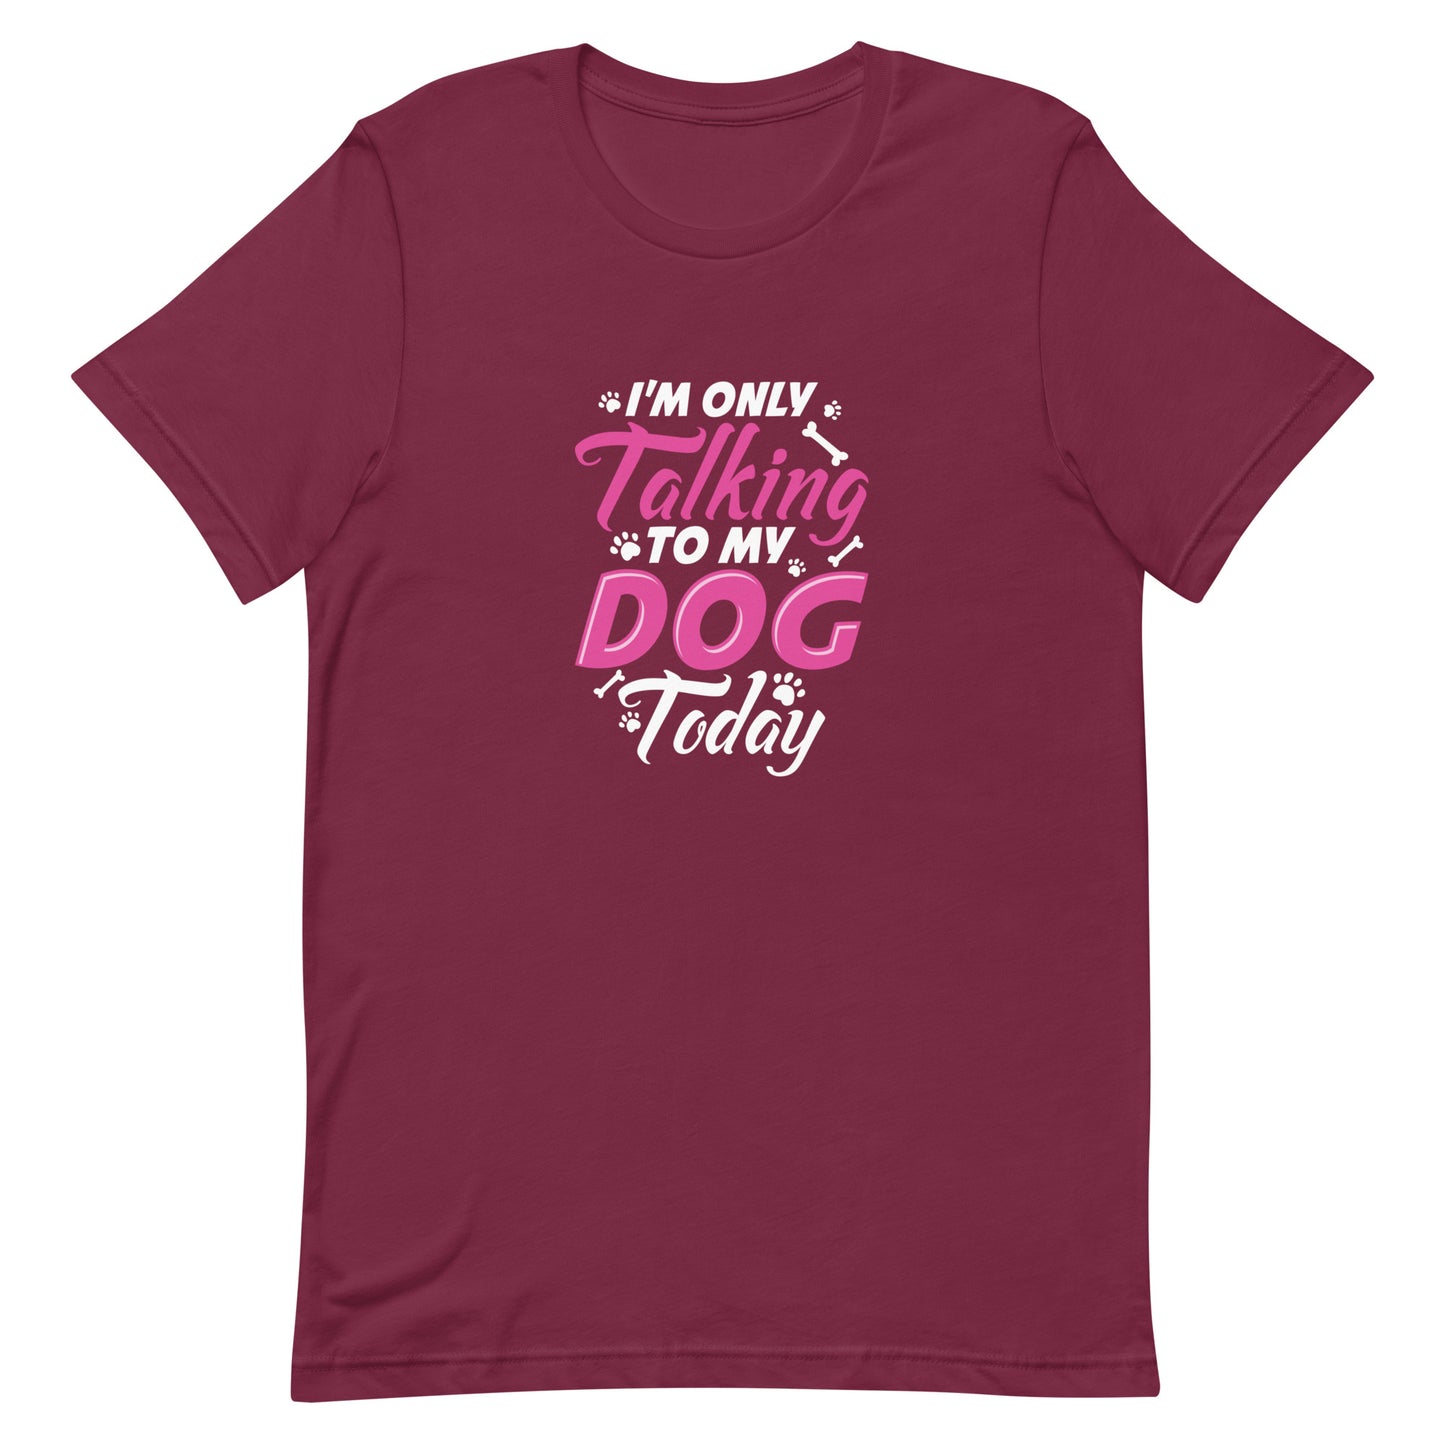 I'm Only Talking to My Dog Today Unisex t-shirt